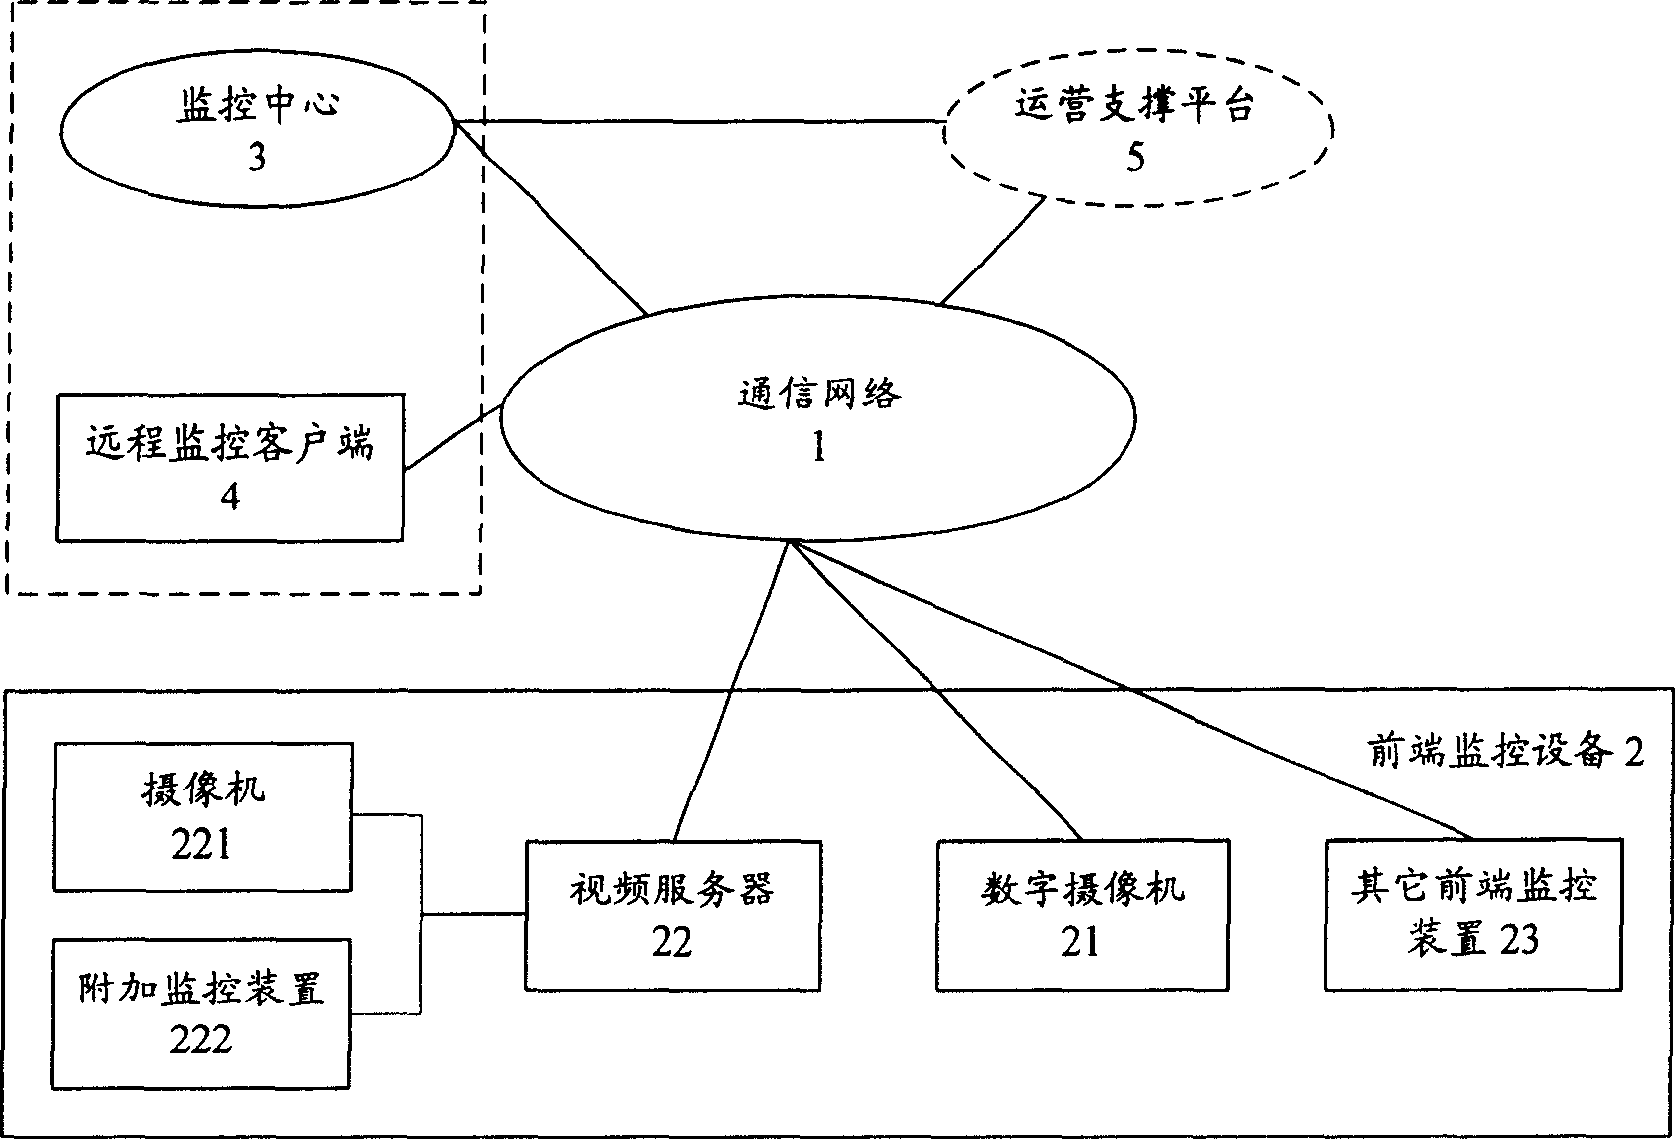 Remote vedio monitoring system based on next generation interconnection network and its implementing method